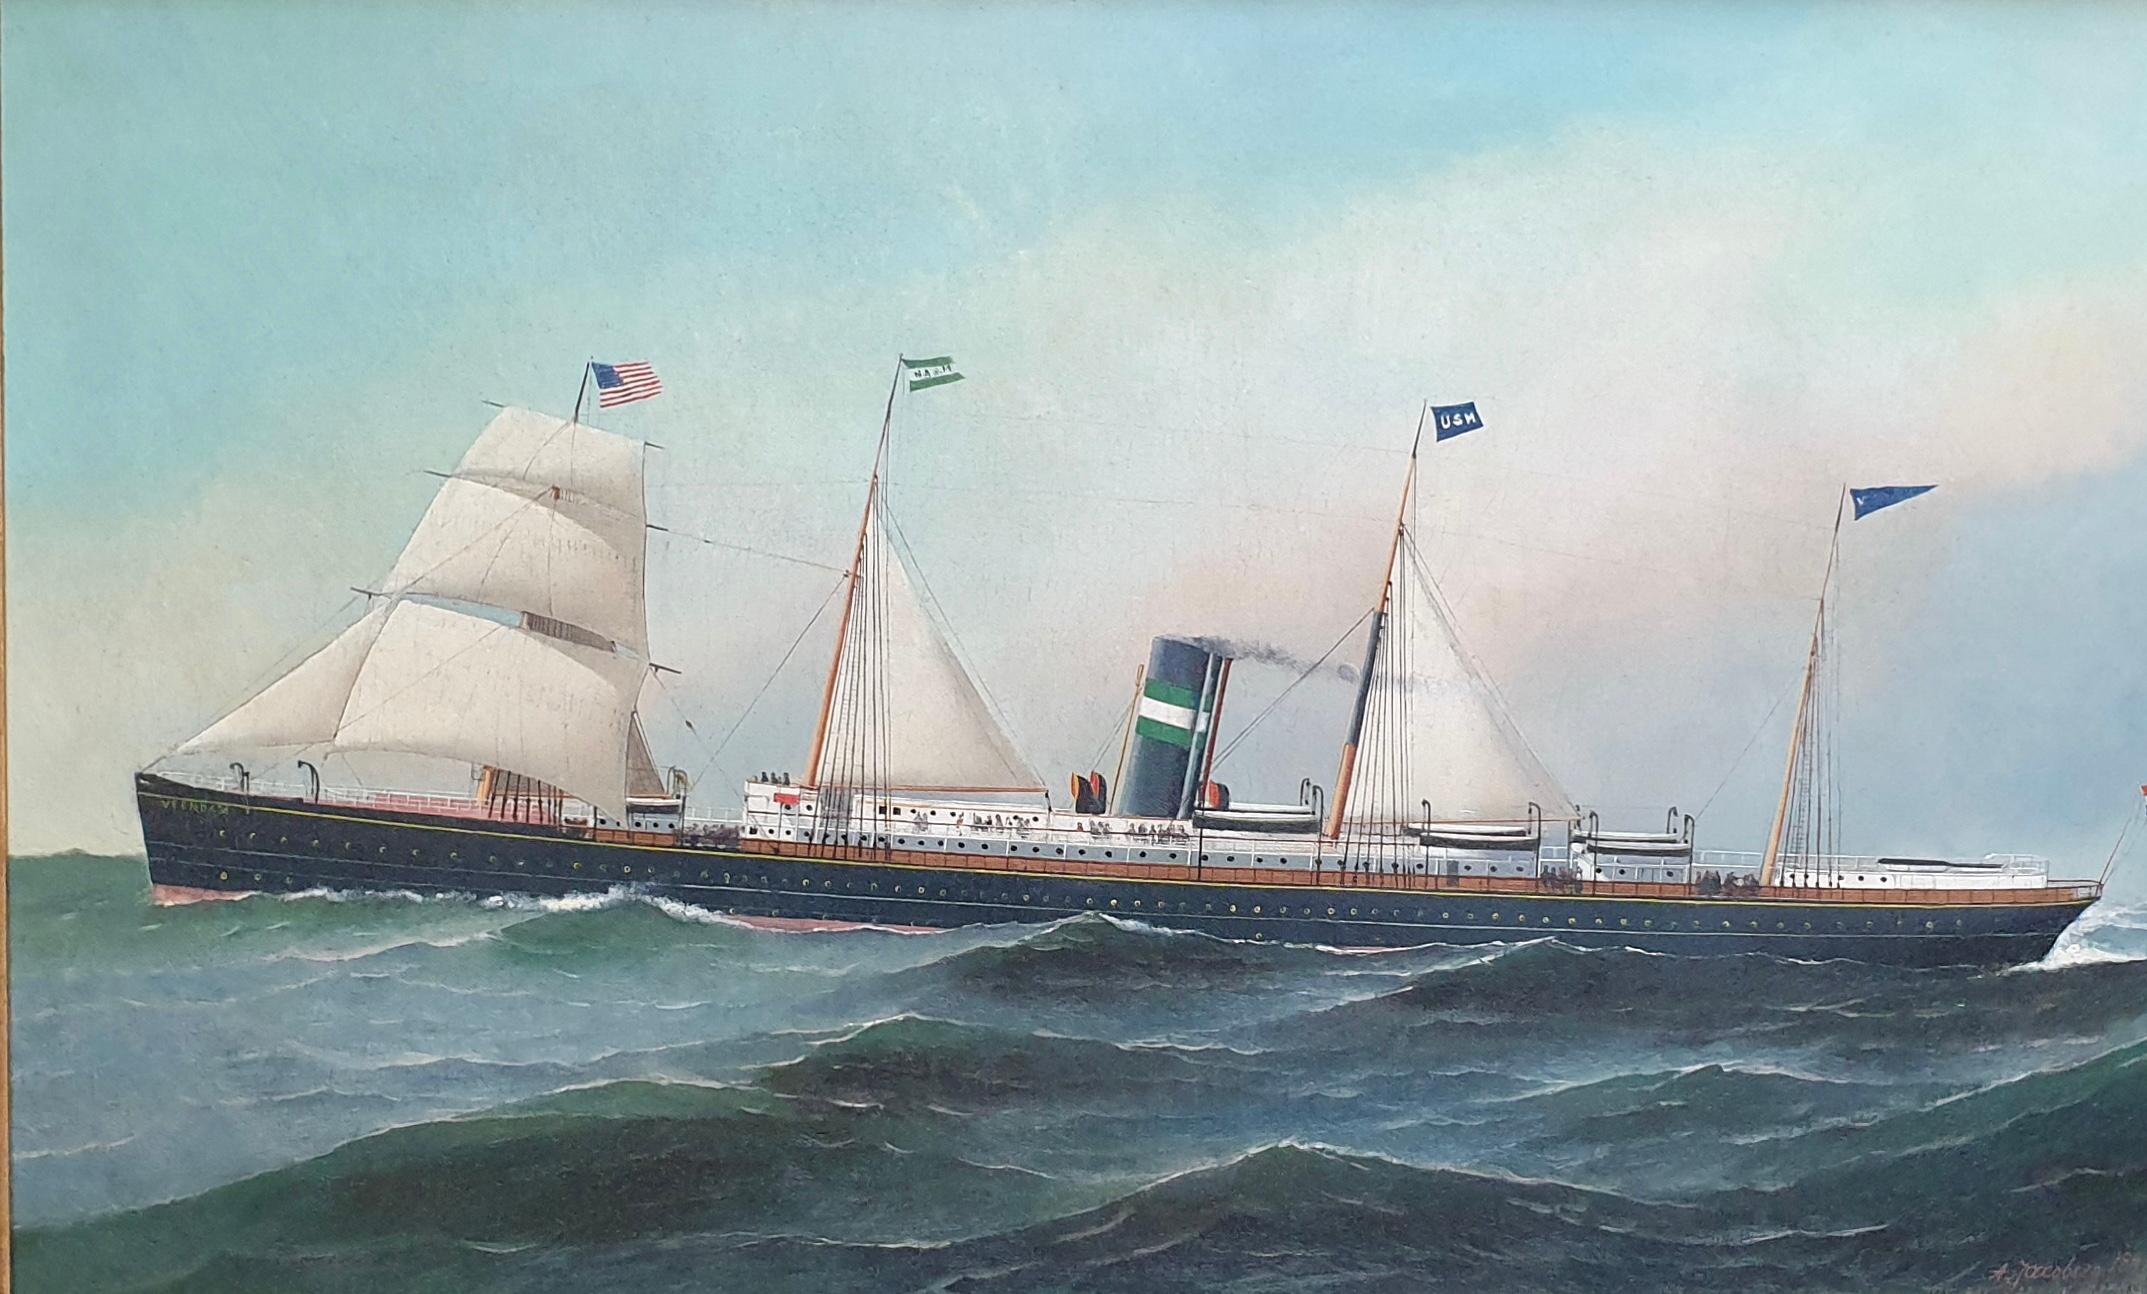 Oil on canvas signed lower right and dated 1891 with inscription 705 Palisade Ave West Hoboken.
Antonio Jacobsen was a well-known painter of maritime subjects in the late 19th and early 20th century. 
His paintings can be found in numerous